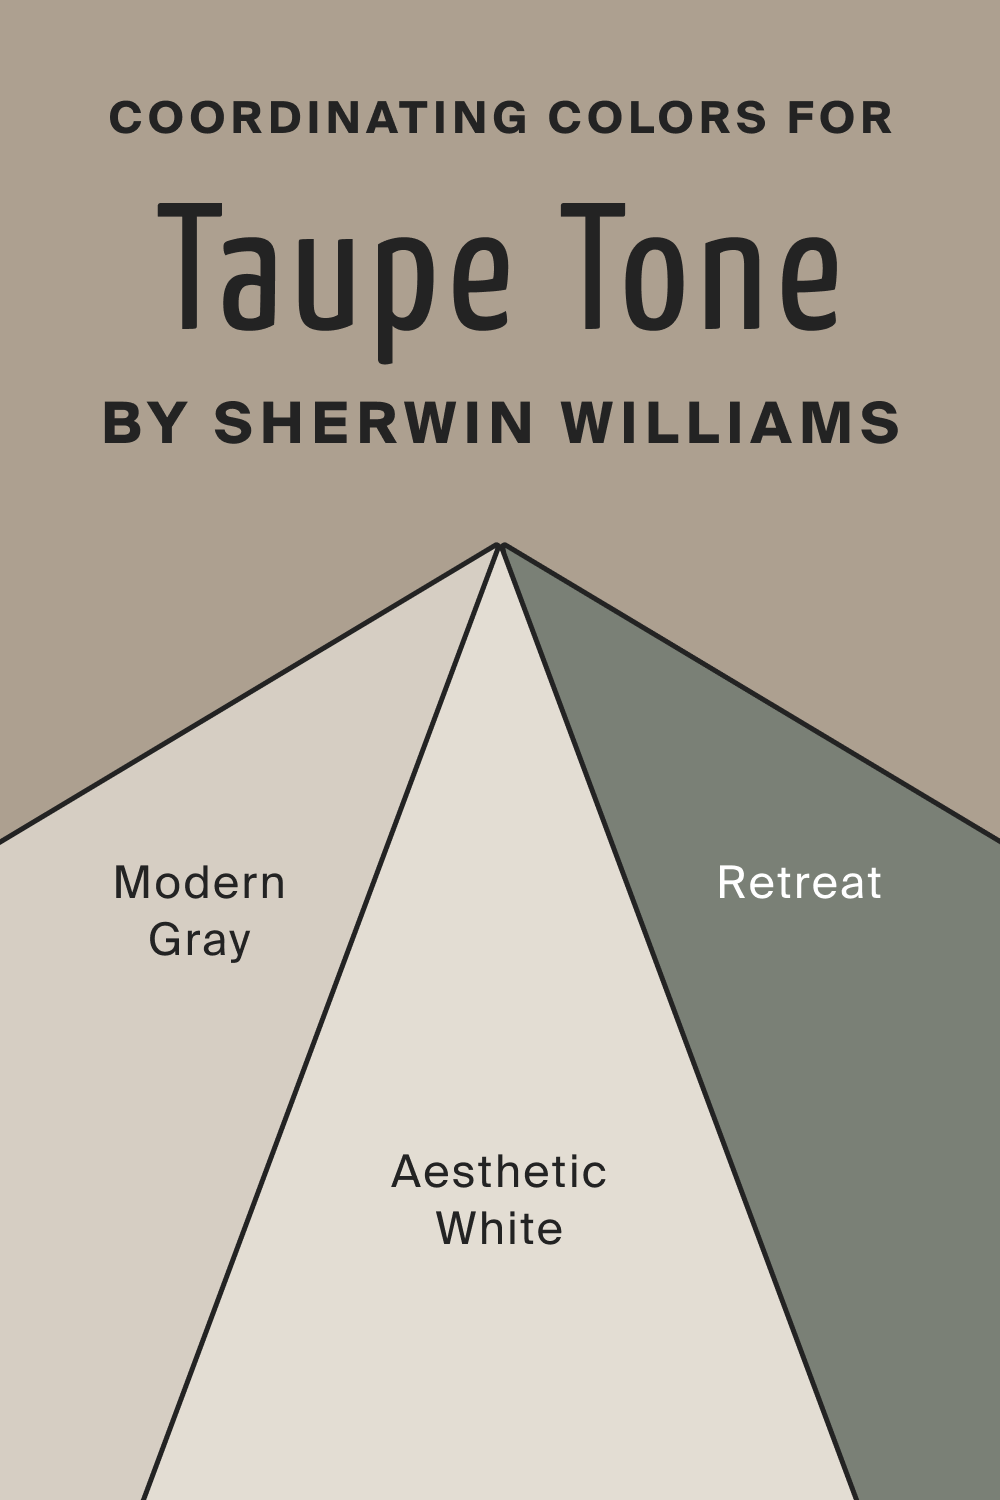 Coordinating Colors for Taupe Tone SW 7633 by Sherwin Williams